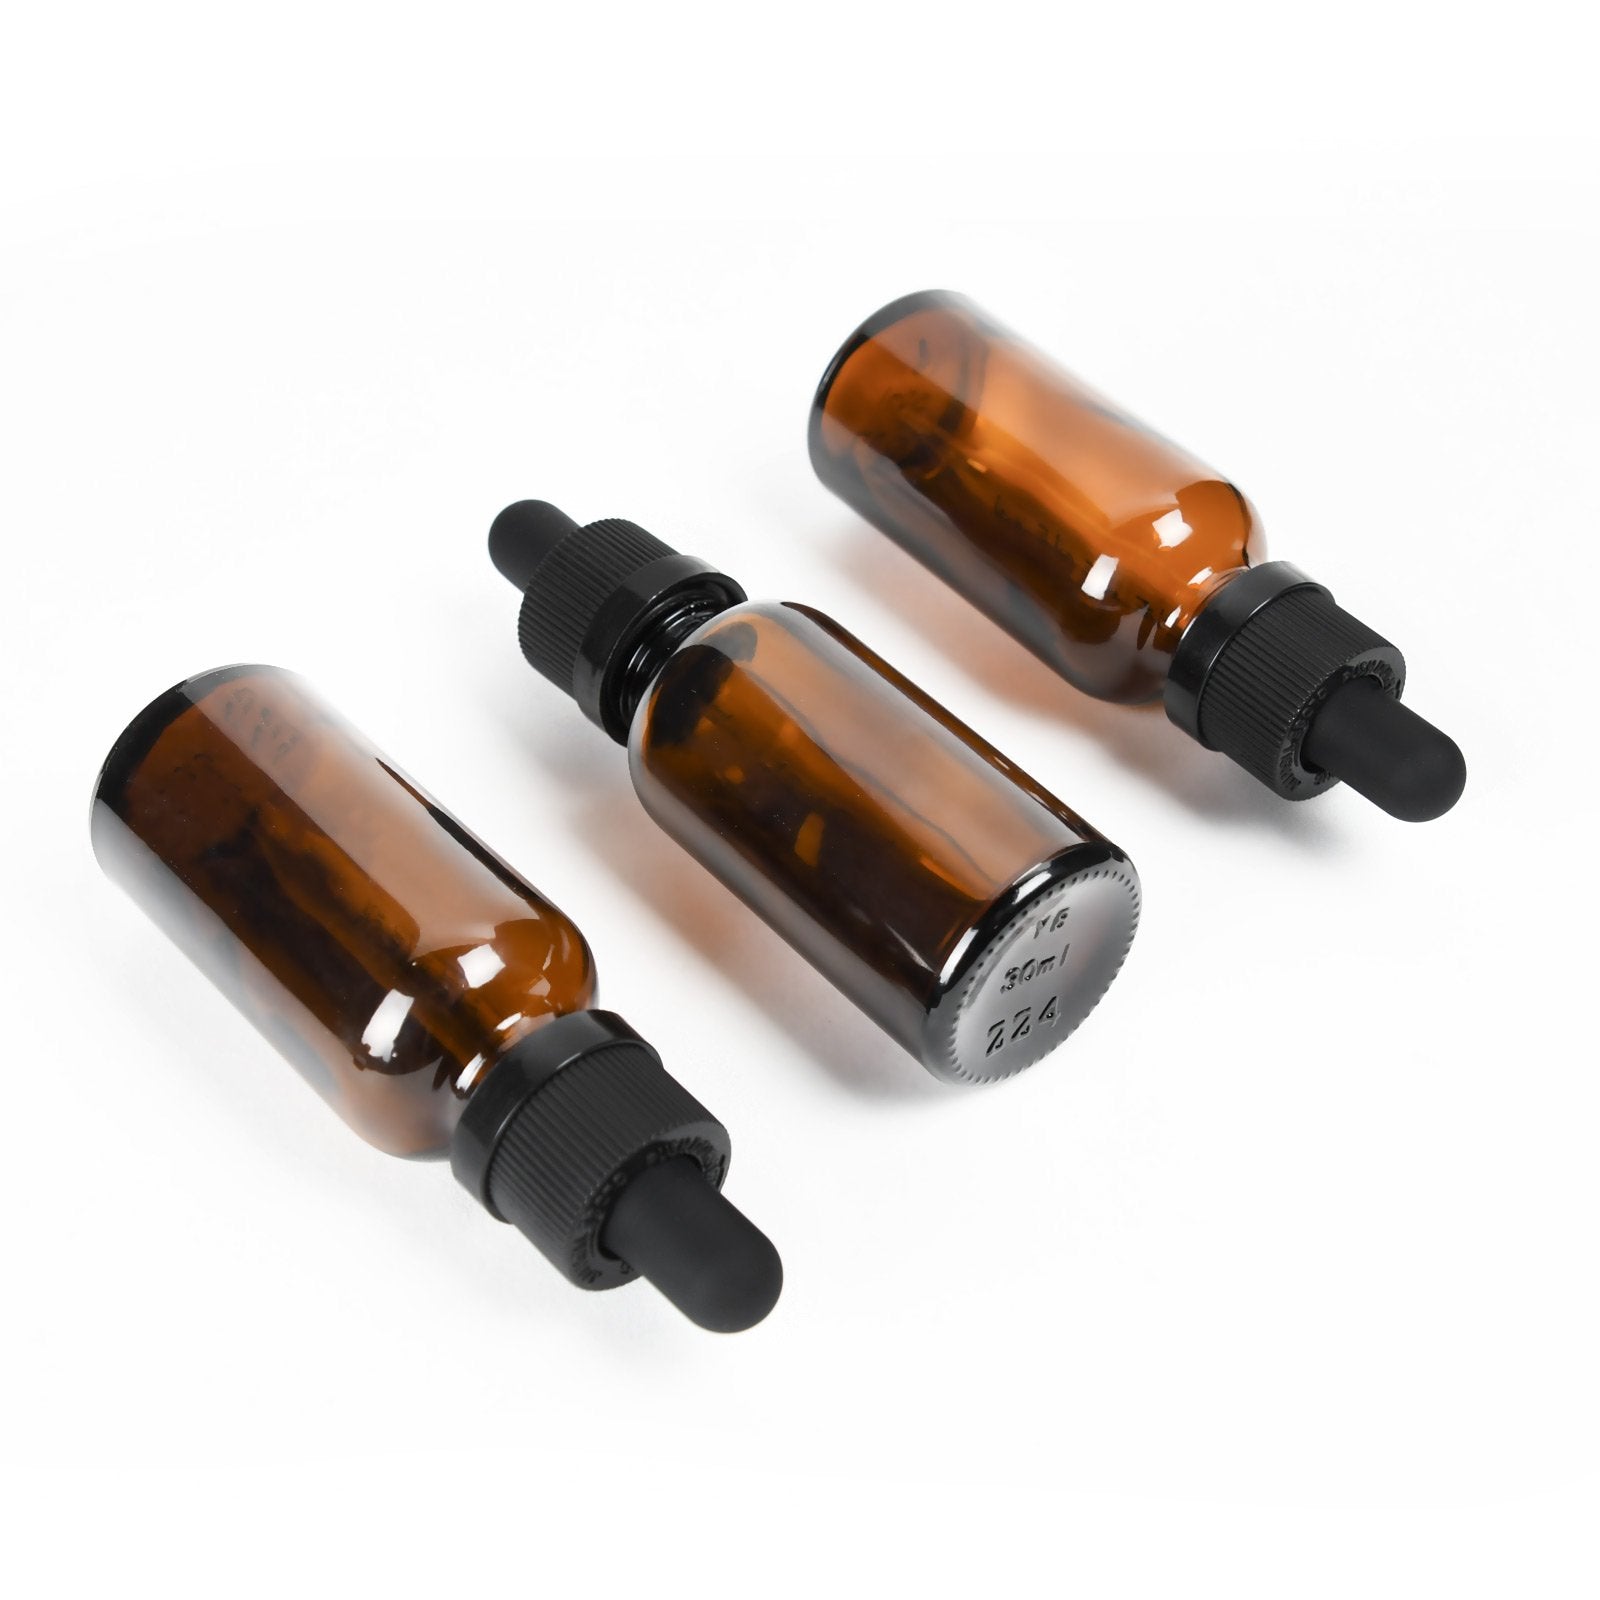 30ml Glass Tincture Dropper Bottles - Amber - 1 Count